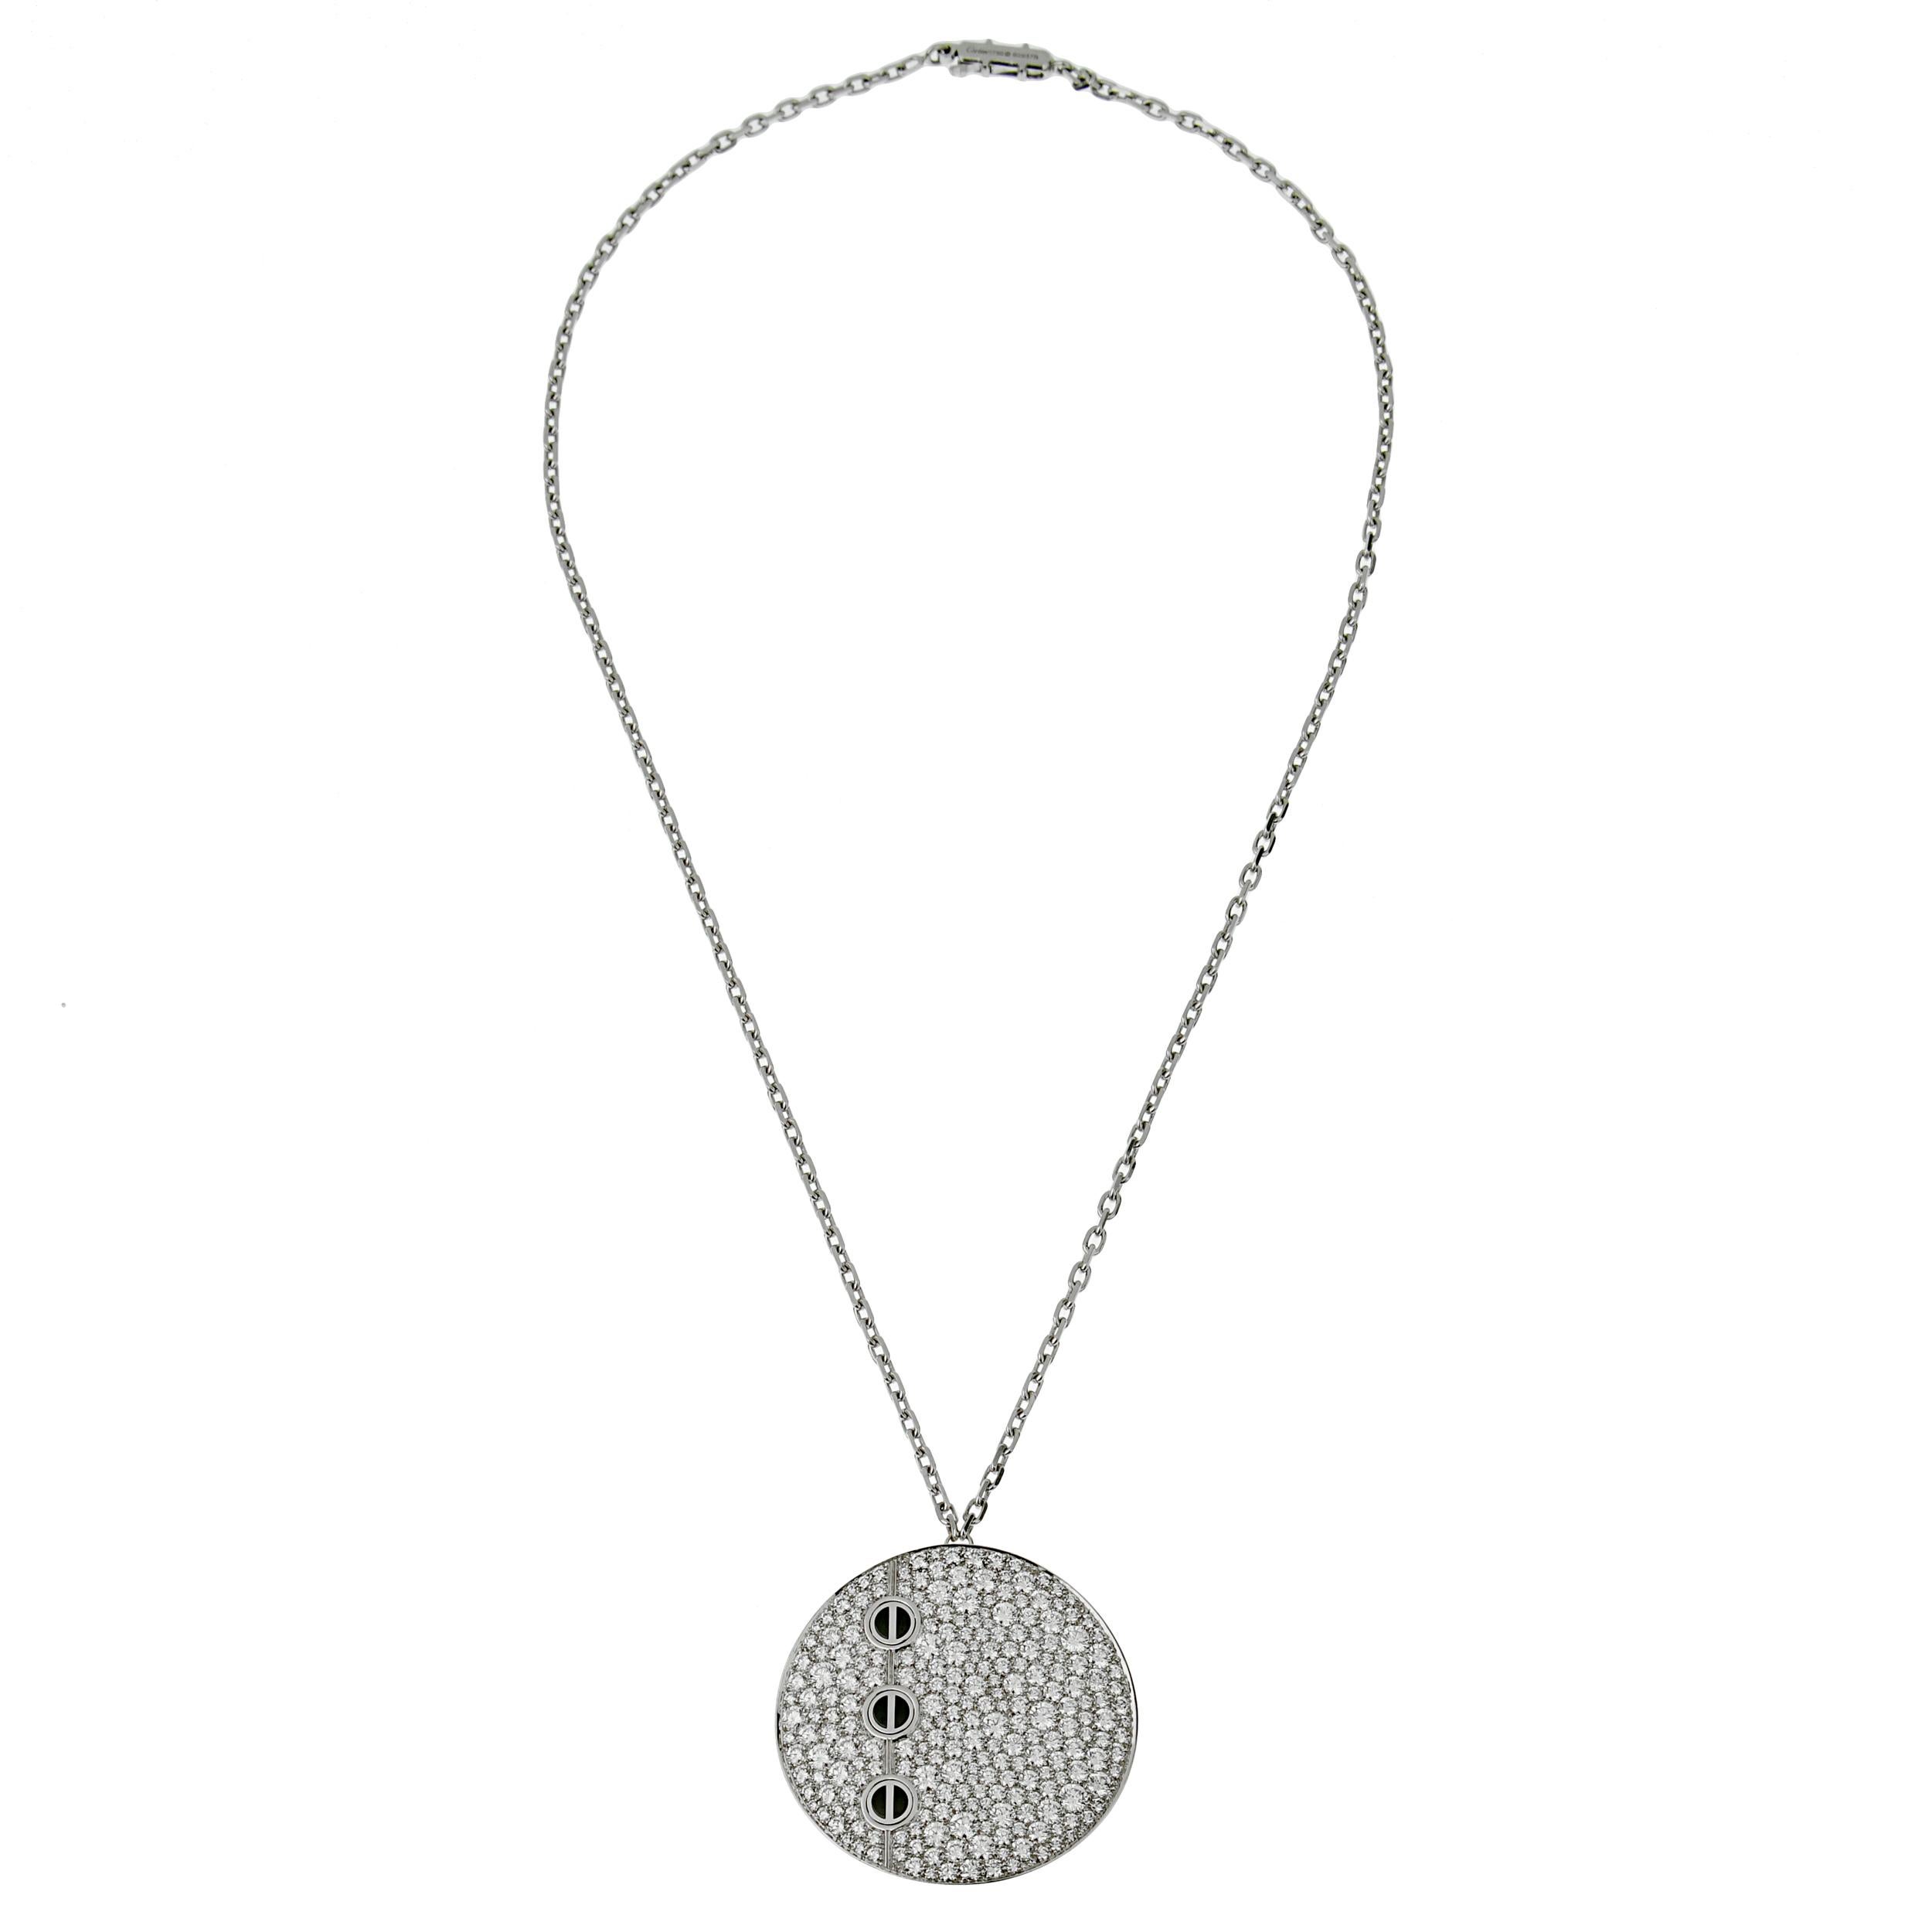 A magnificent special order Cartier Love pendant diamond necklace circa 2000s showcasing over 5ct of the finest original Cartier round brilliant cut diamonds pave set with 3 iconic screw motifs crafted in onyx. The pendant measures 1.37